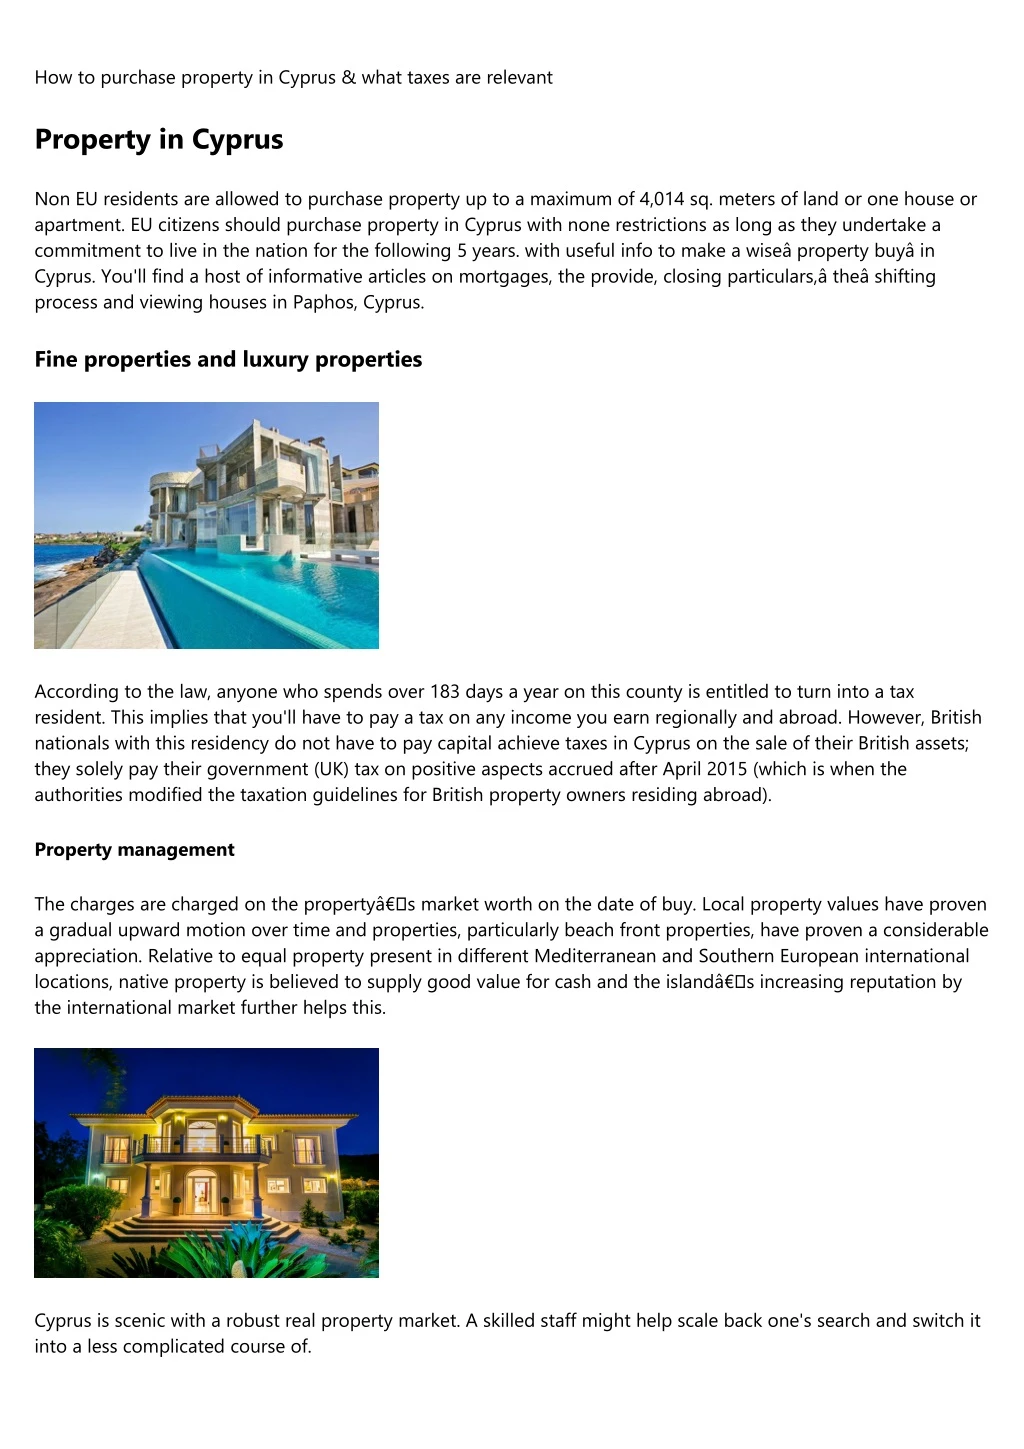 how to purchase property in cyprus what taxes